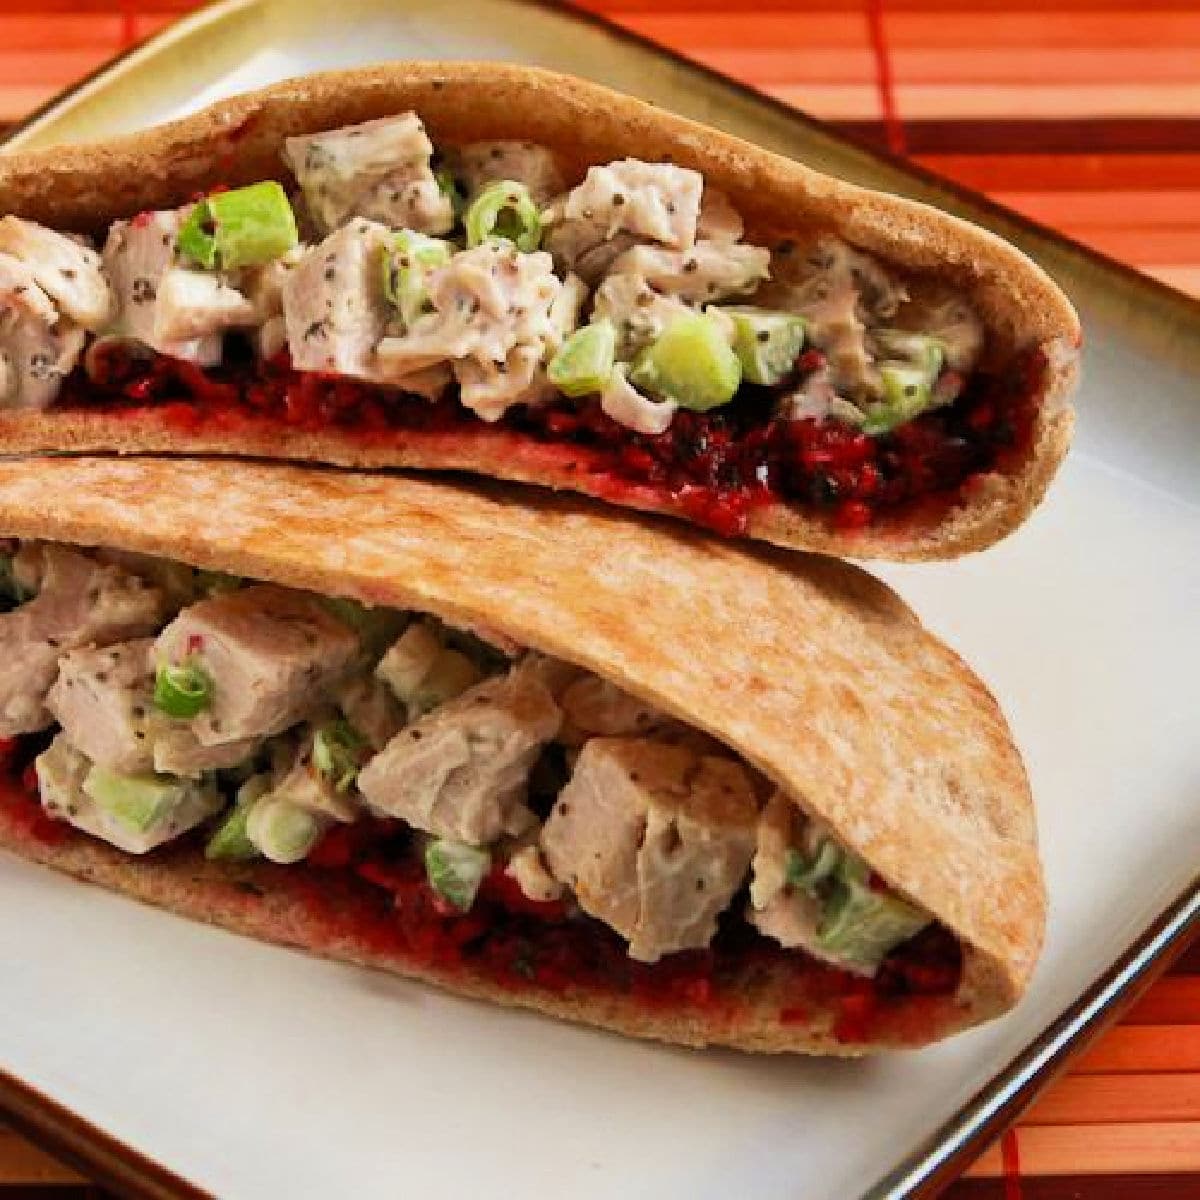 Turkey Pita Sandwiches (with Trina's Cranberry Salsa) shown with two pita halves on plate.